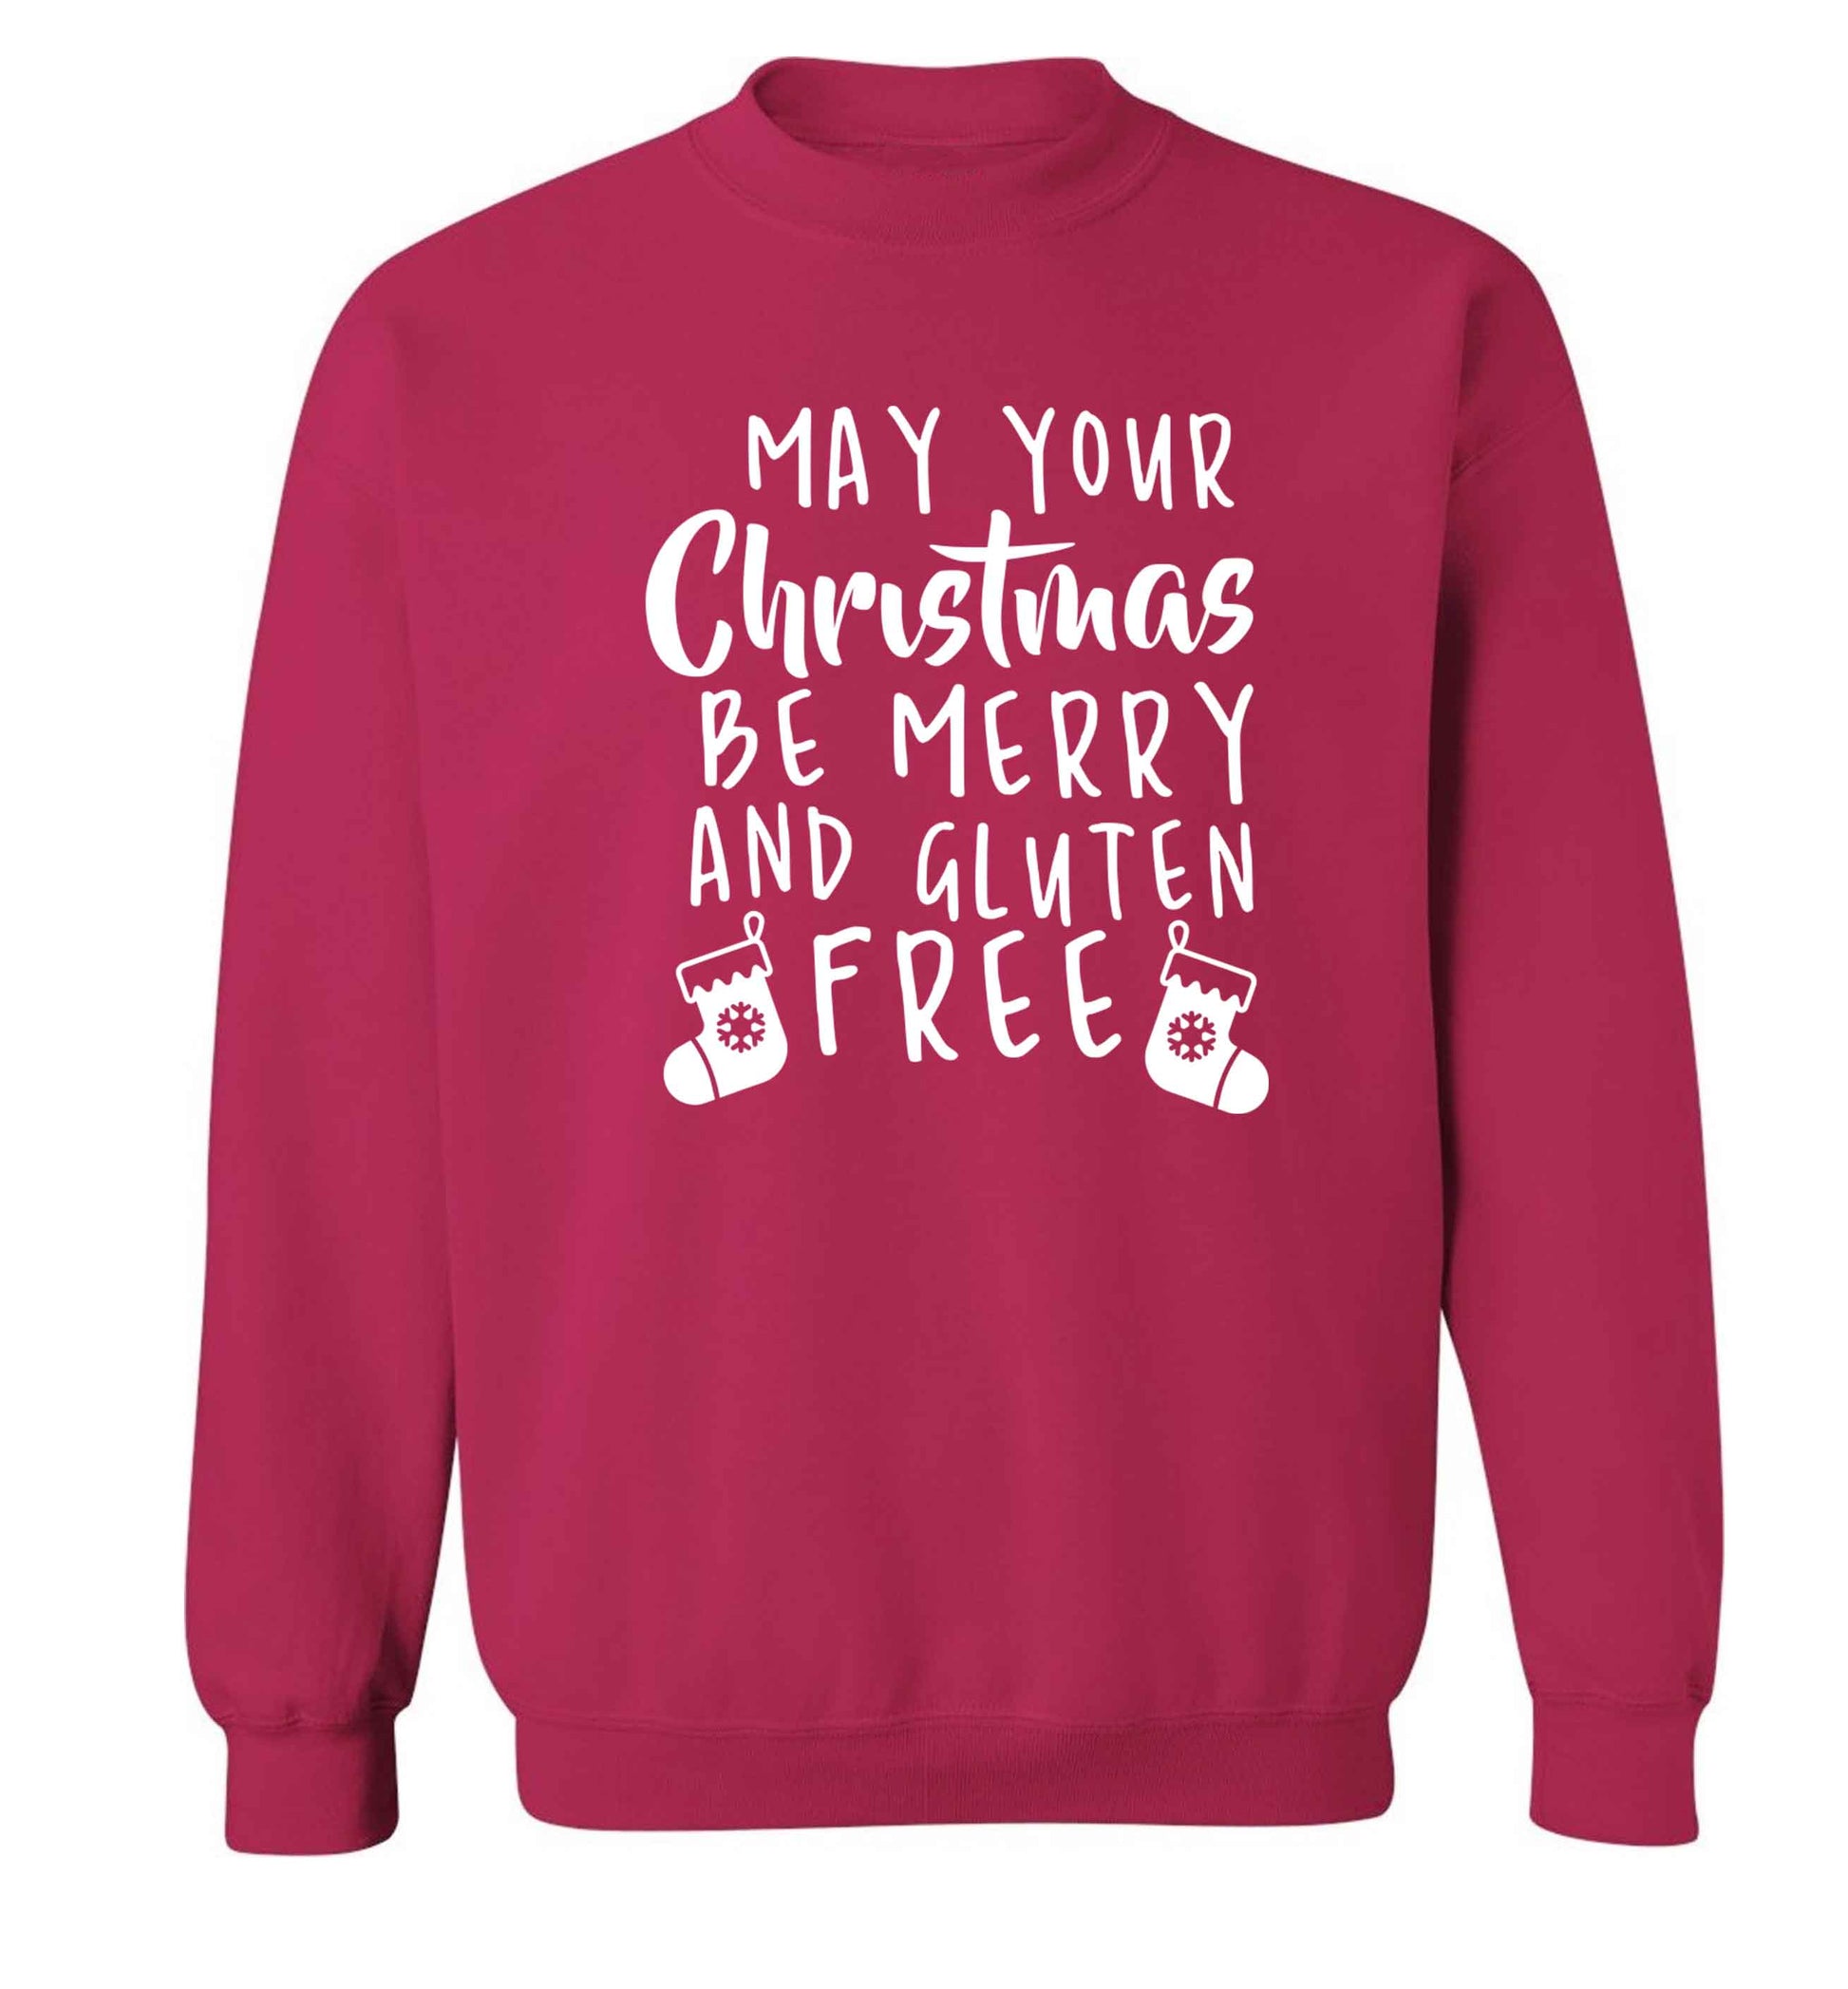 May your Christmas be merry and gluten free Adult's unisex pink Sweater 2XL